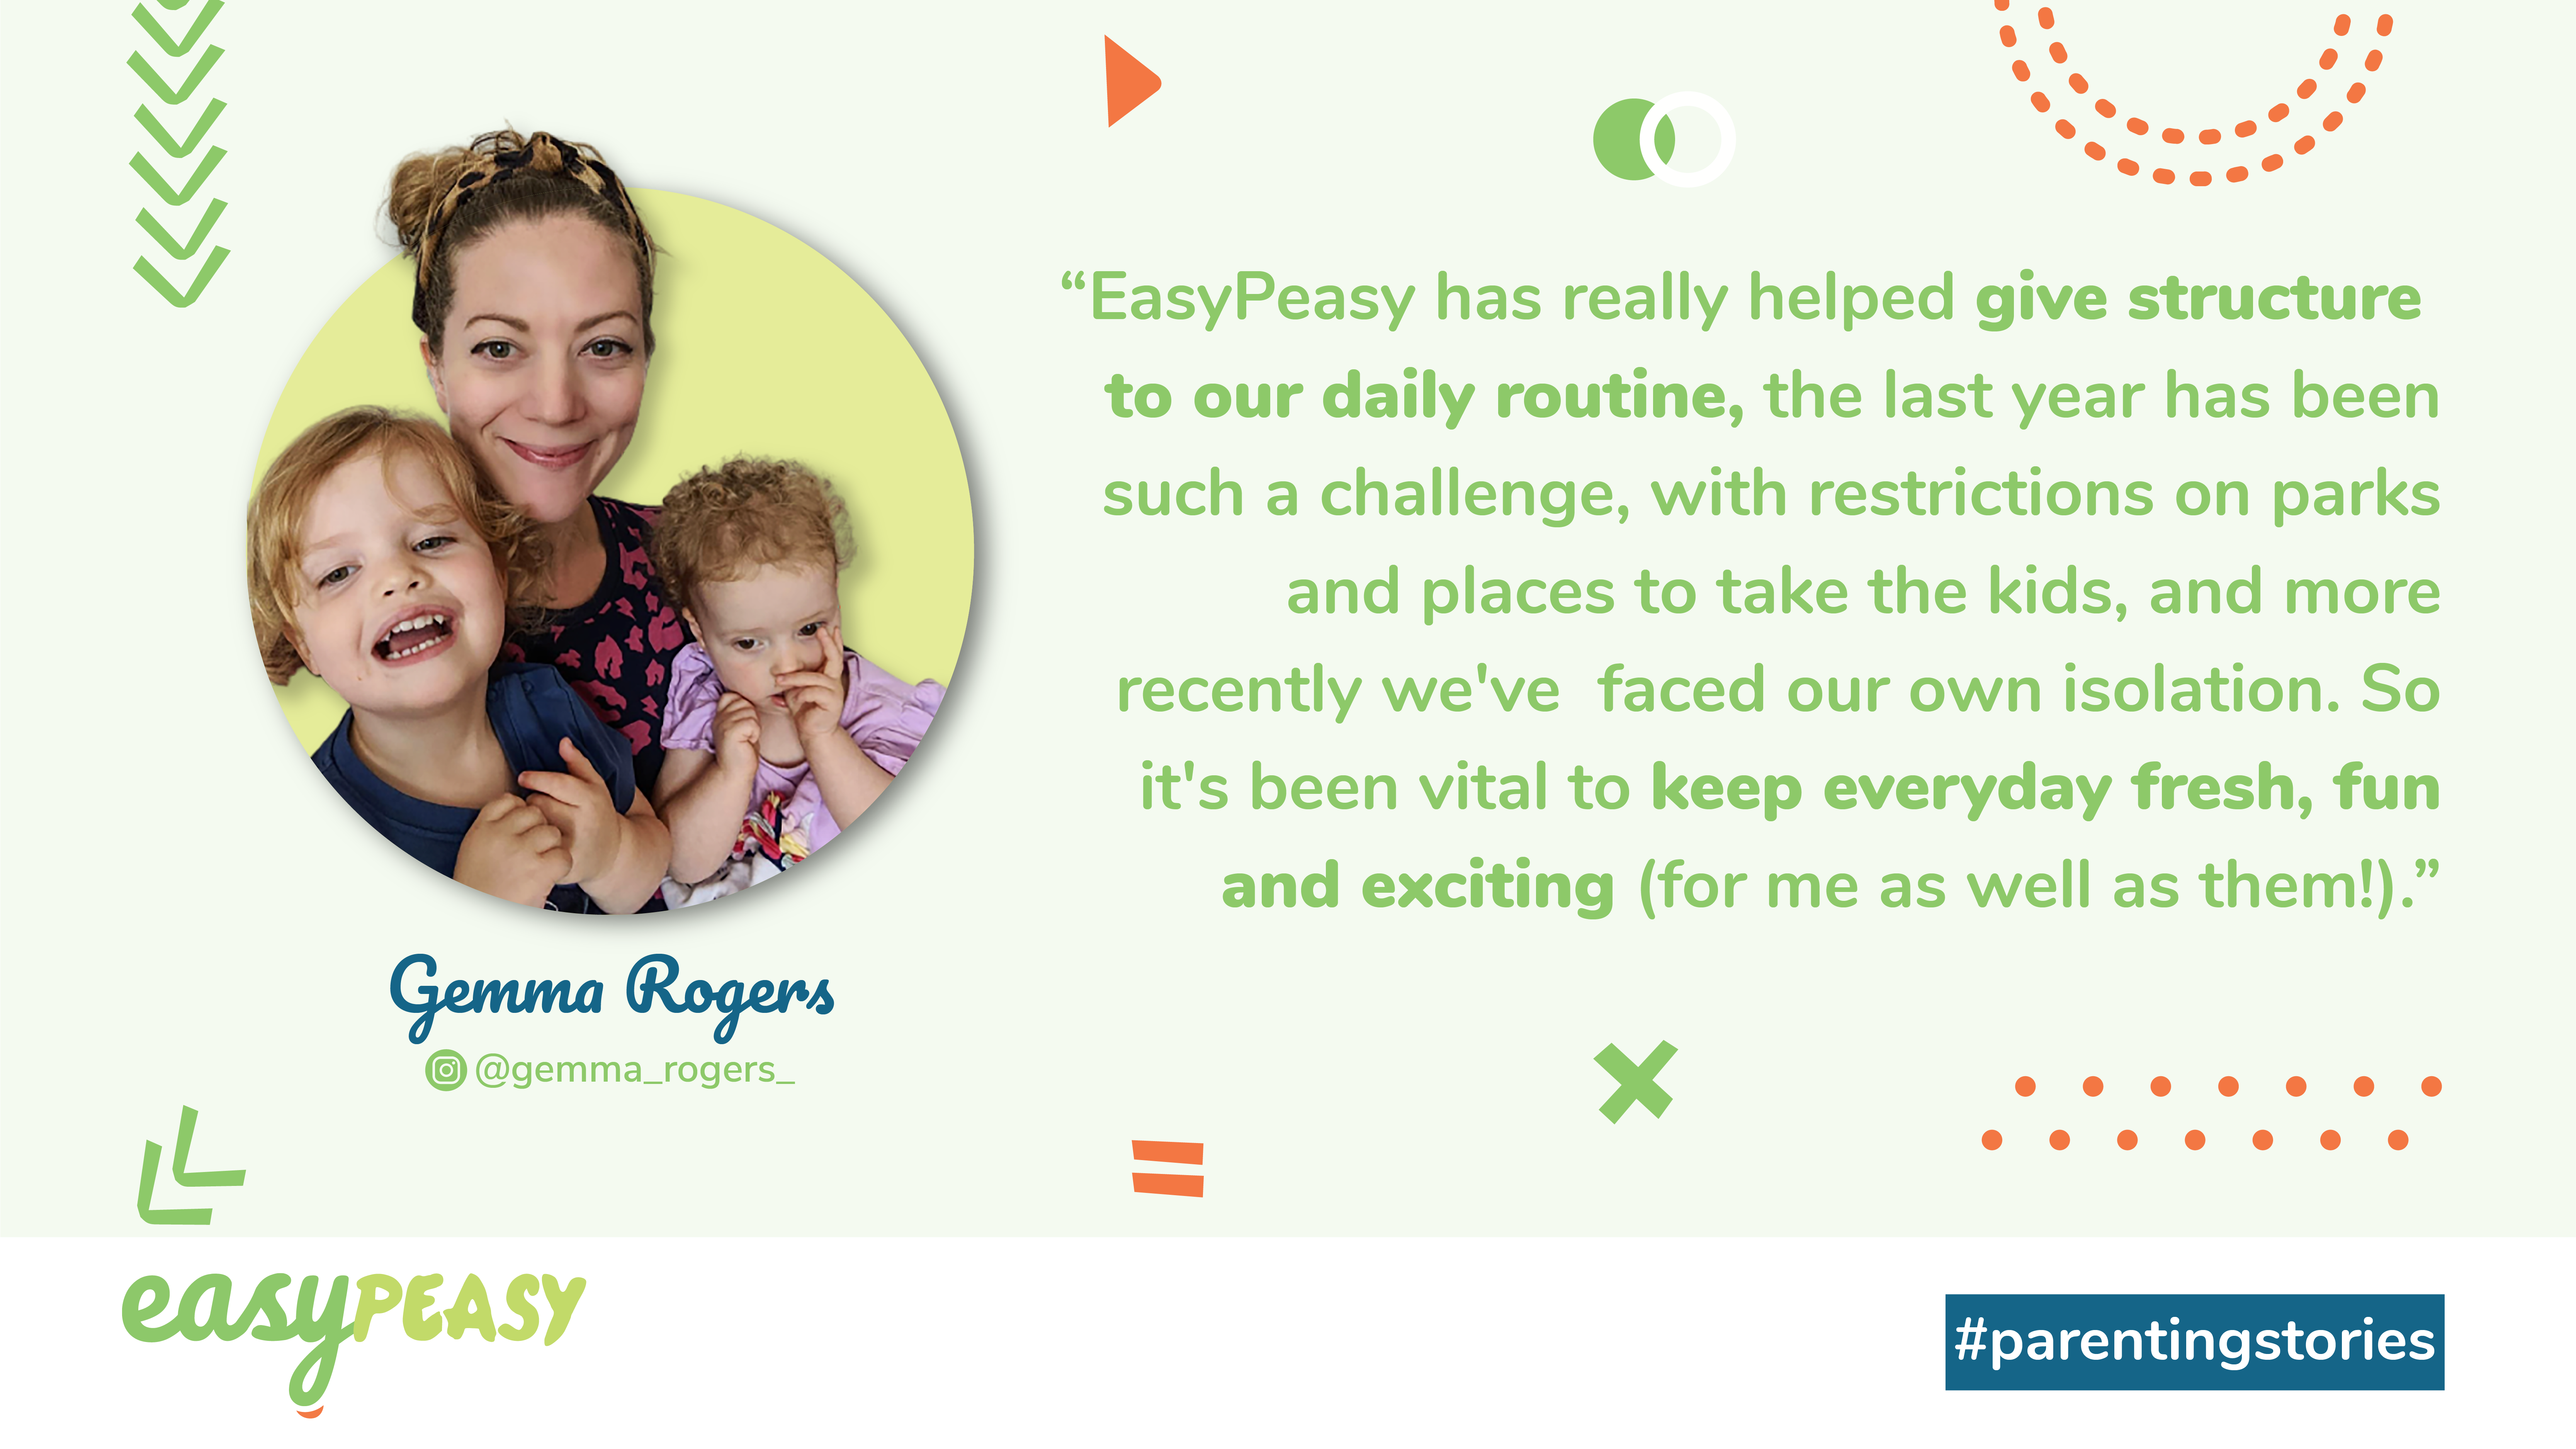 Gemma Rogers shares her EasyPeasy story with parents on Twitter  